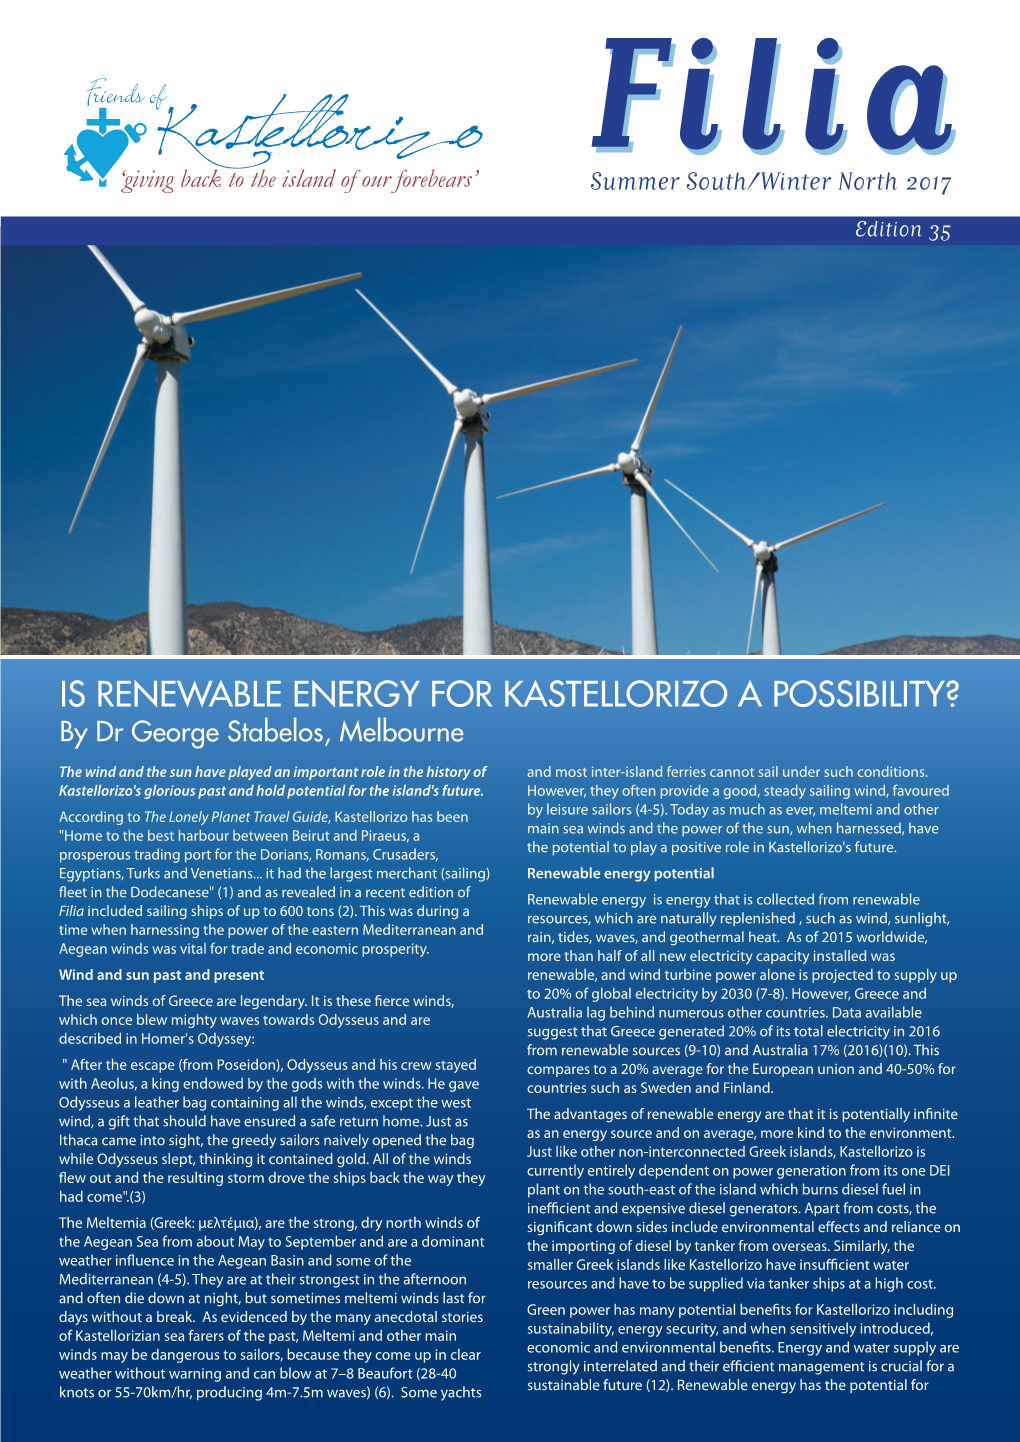 IS RENEWABLE ENERGY for KASTELLORIZO a POSSIBILITY? by Dr George Stabelos, Melbourne